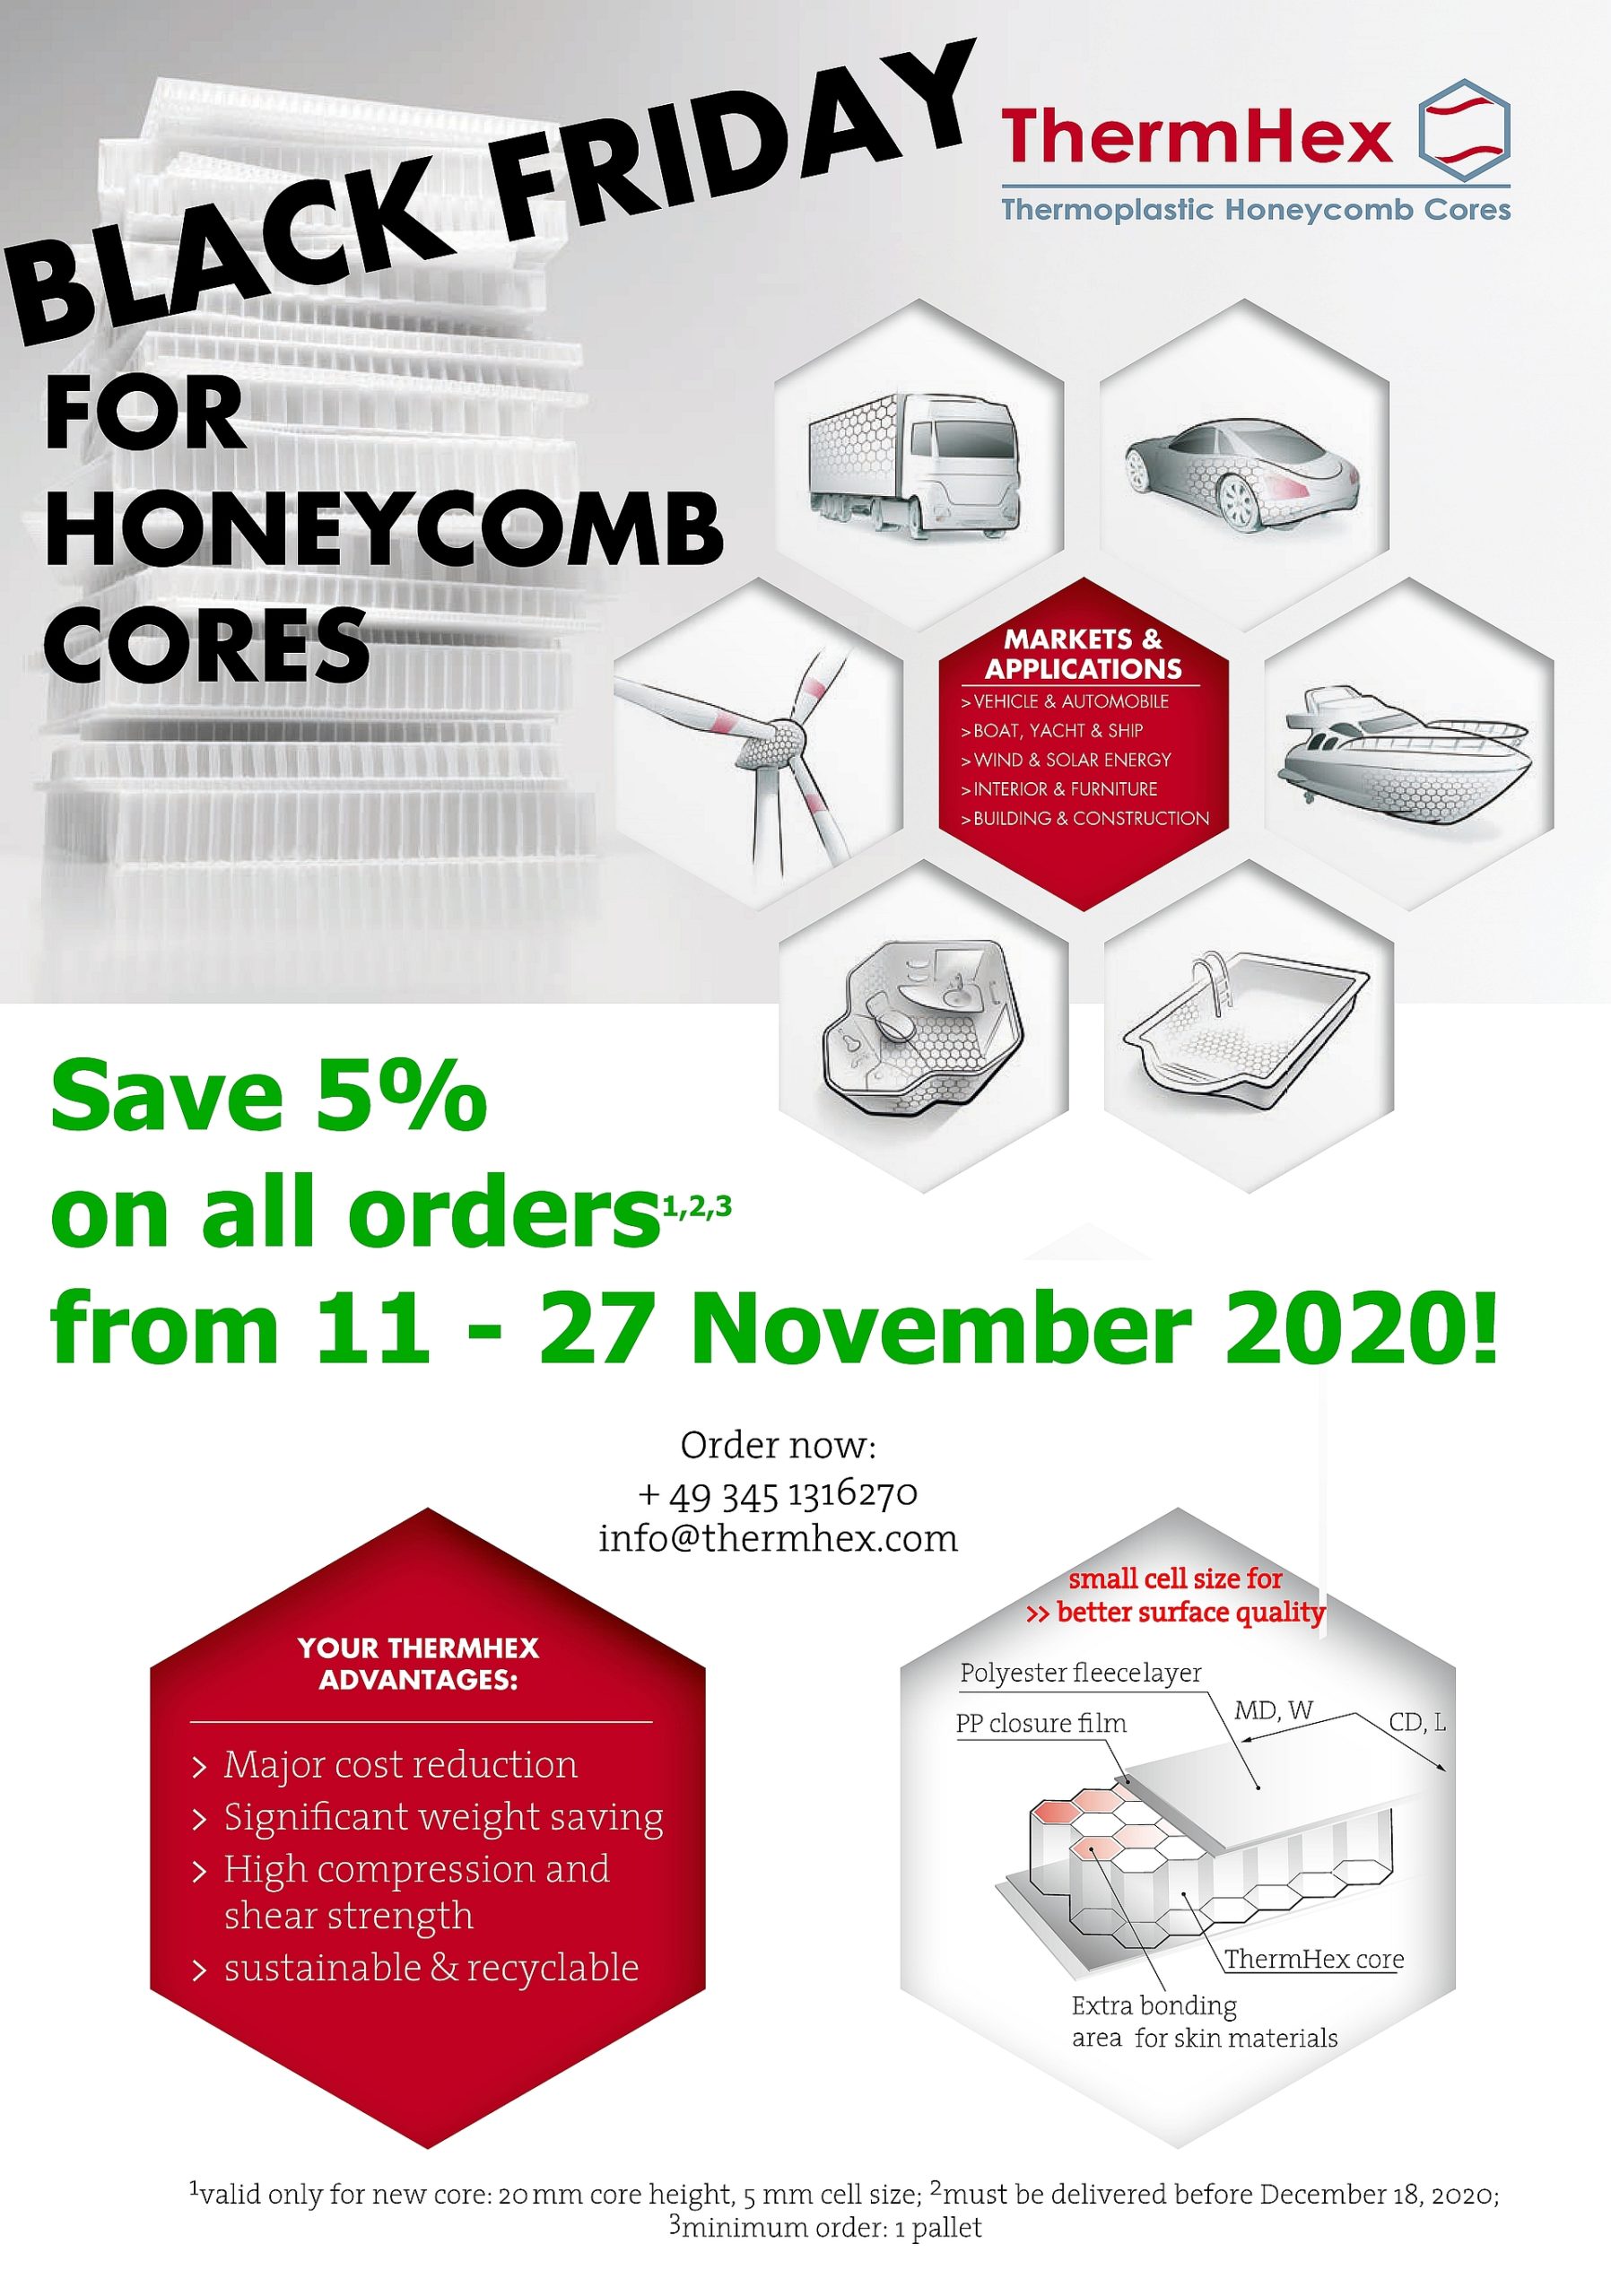 Black friday for honeycomb cores, save 5% on all orders for our new product with 20mm core height and 5mm cell size, only valid between November 11 and 27, several conditions apply